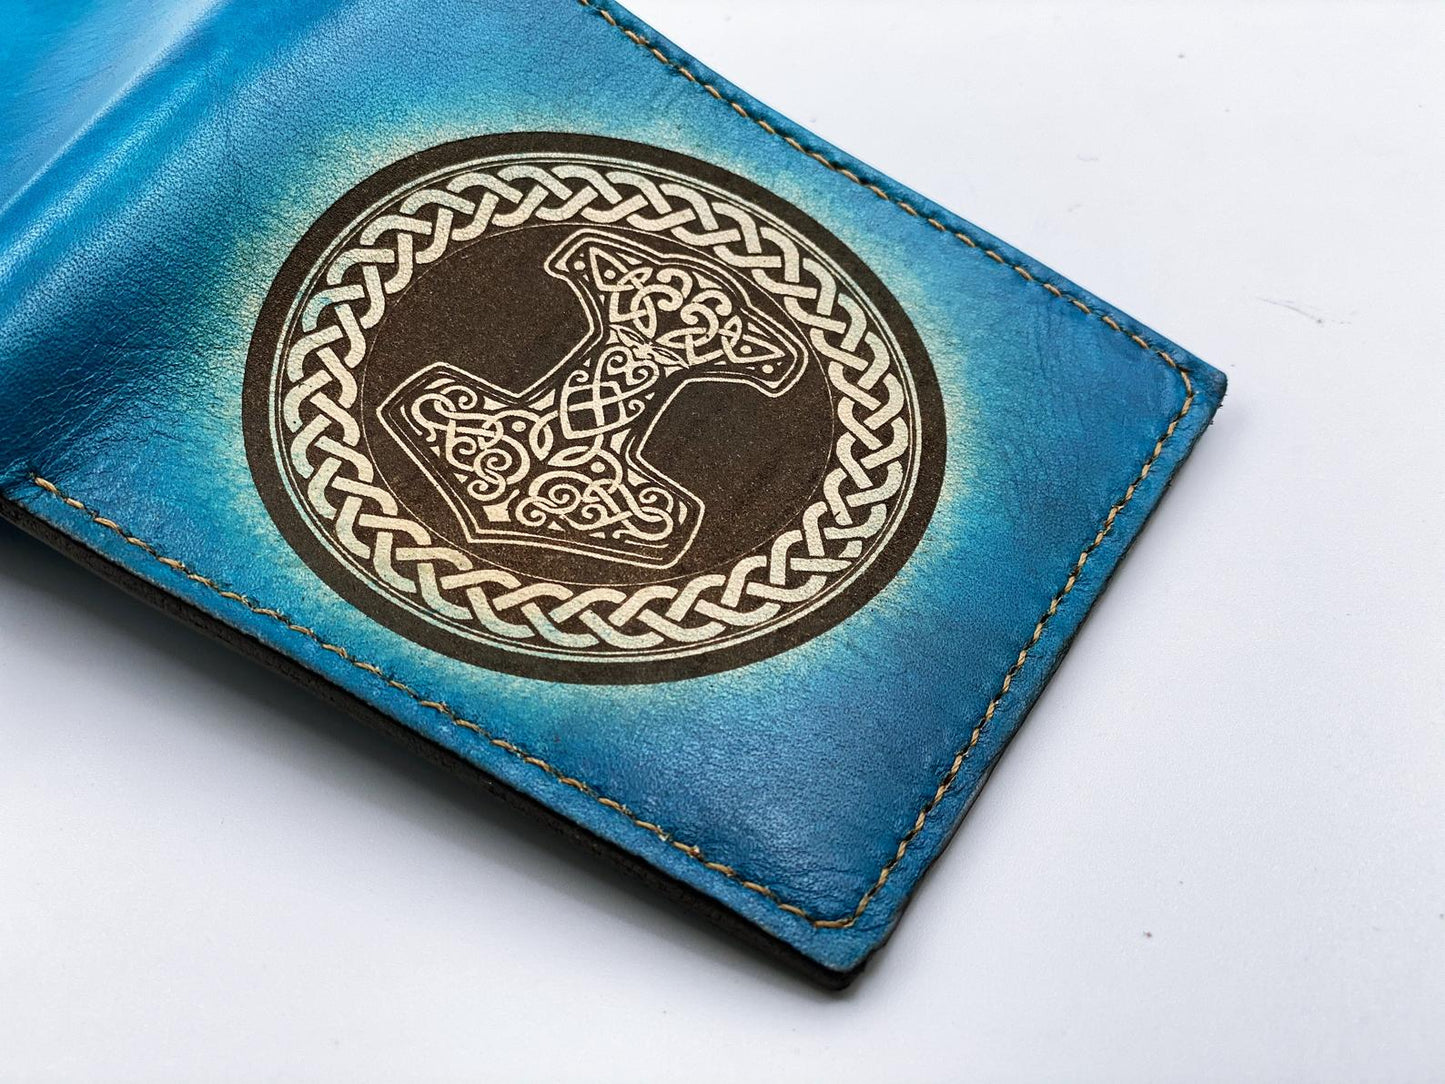 Mayan Corner - Thor's hammer mjolnir leather handmade men's wallet, custom gifts for him, father's day gifts, anniversary gift for men